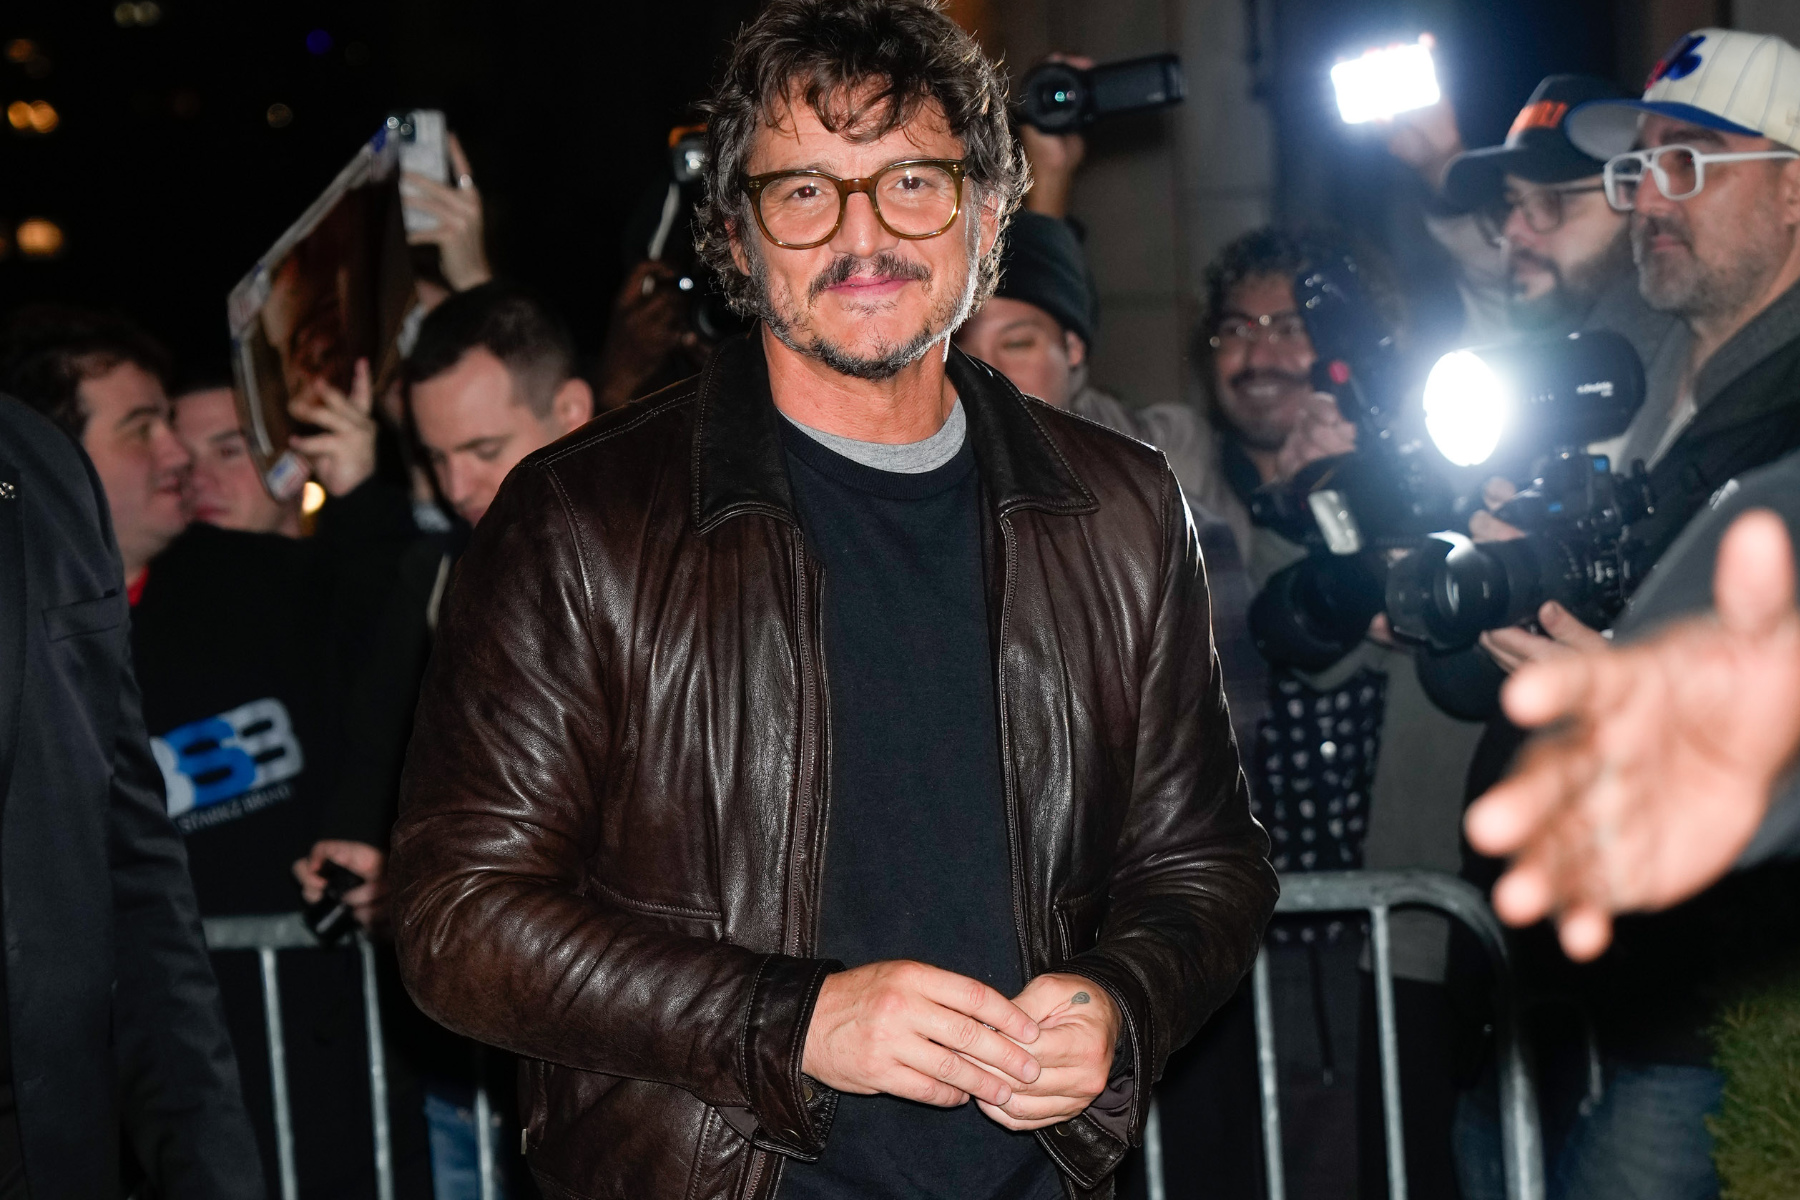 Pedro Pascal is making a case for beat up sneakers.